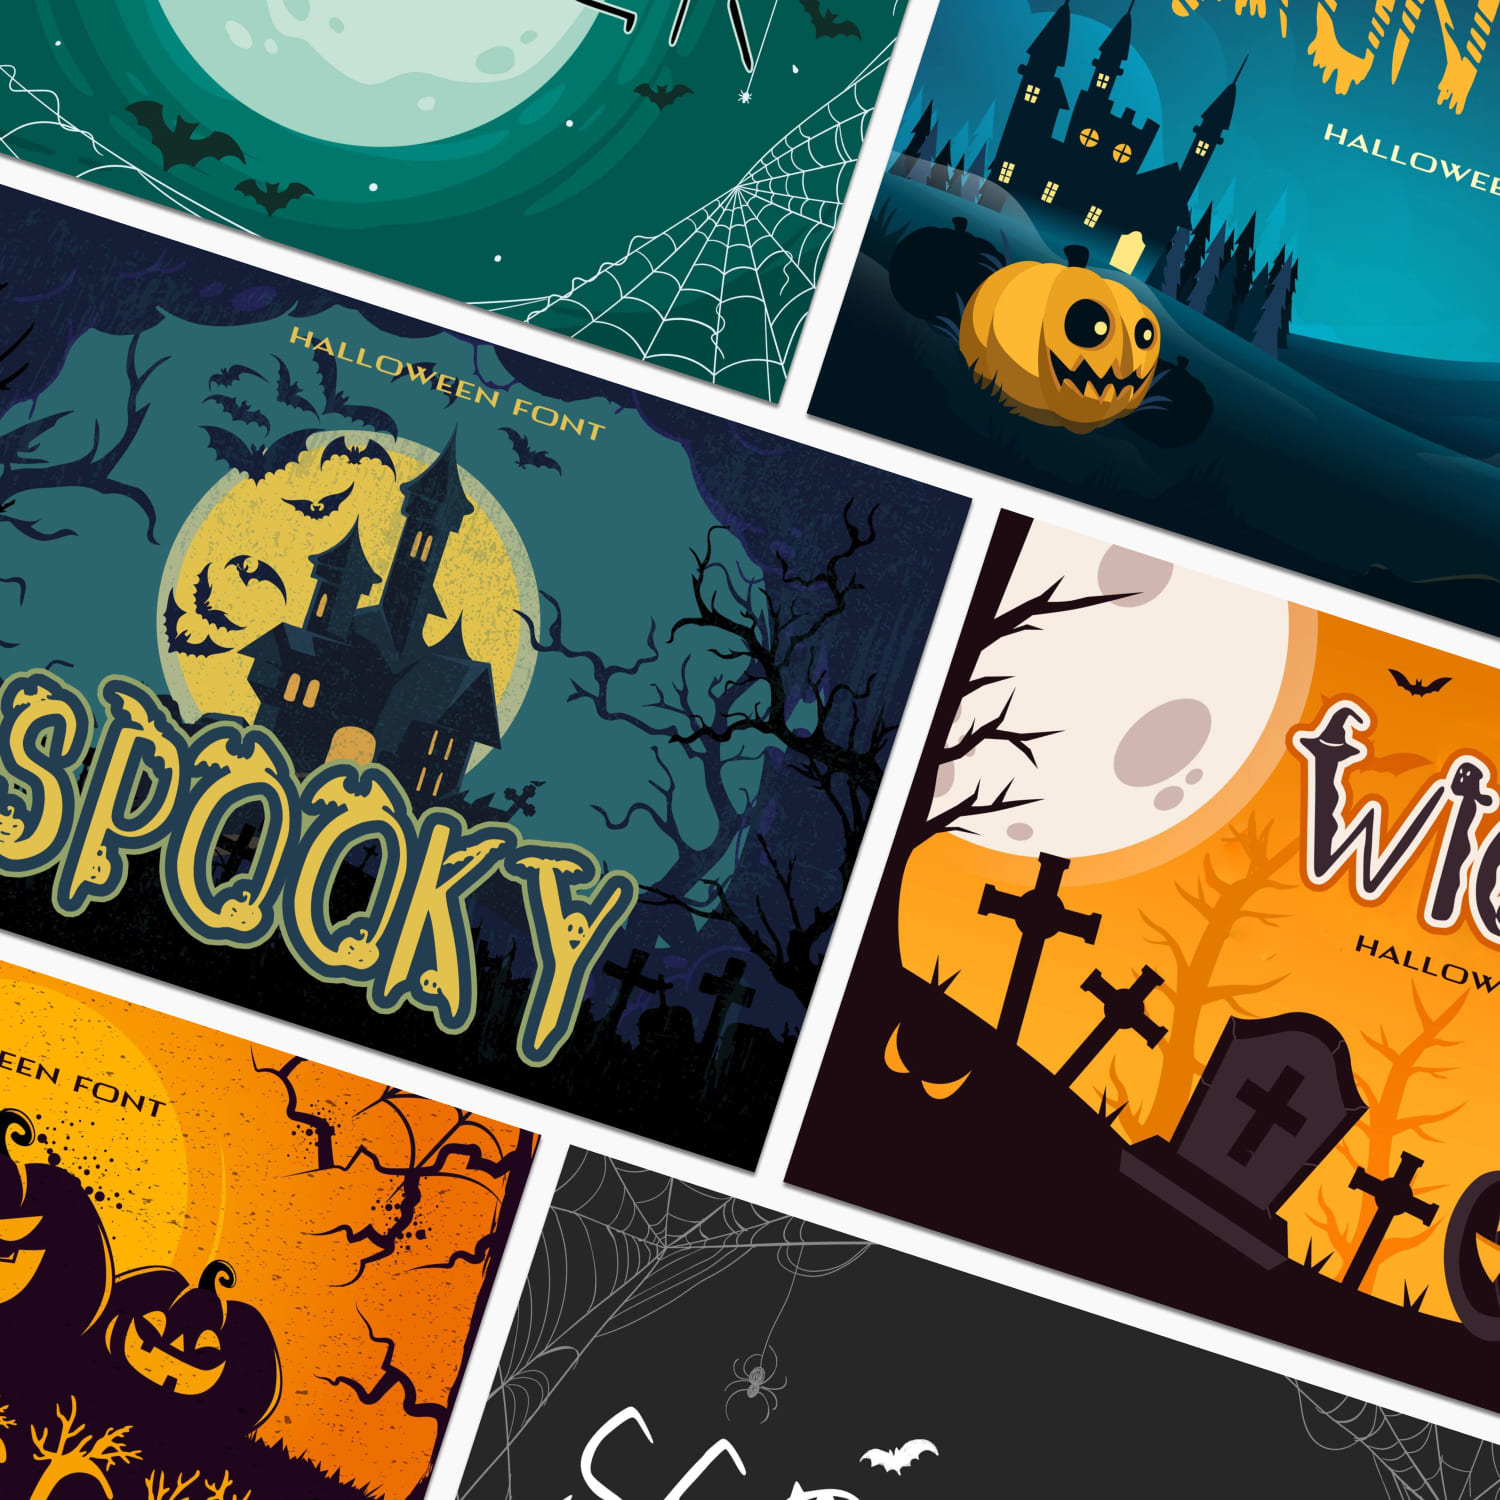 25 Halloween Multilingual Fonts cover.